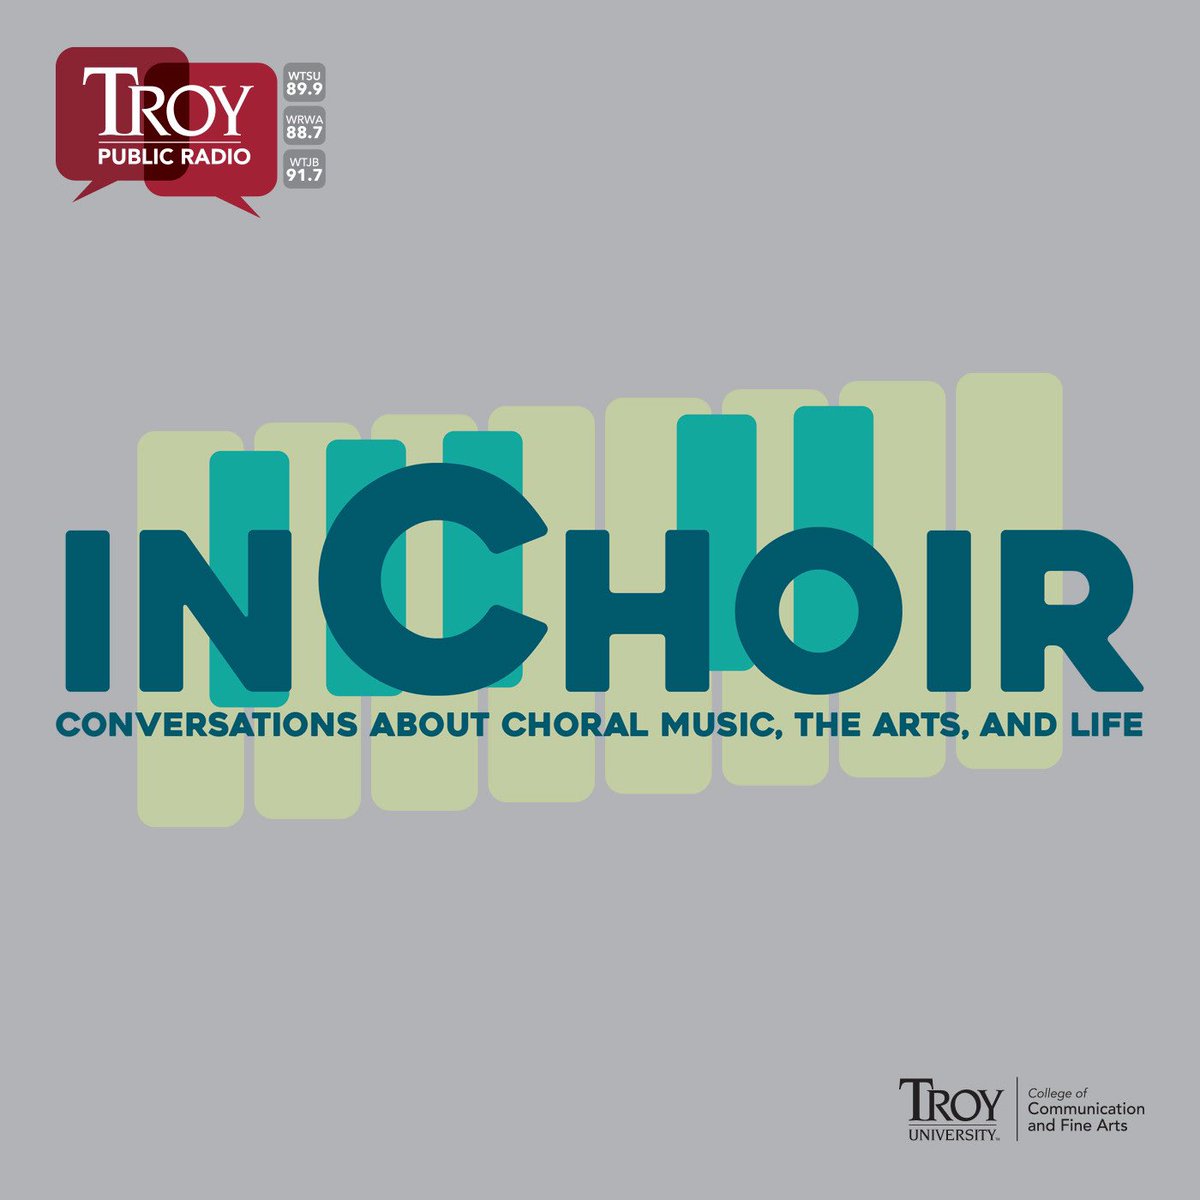 Been hitting the podcast circuit lately! Chatted with InChoir about The Lost Birds. Check it out, link in bio!